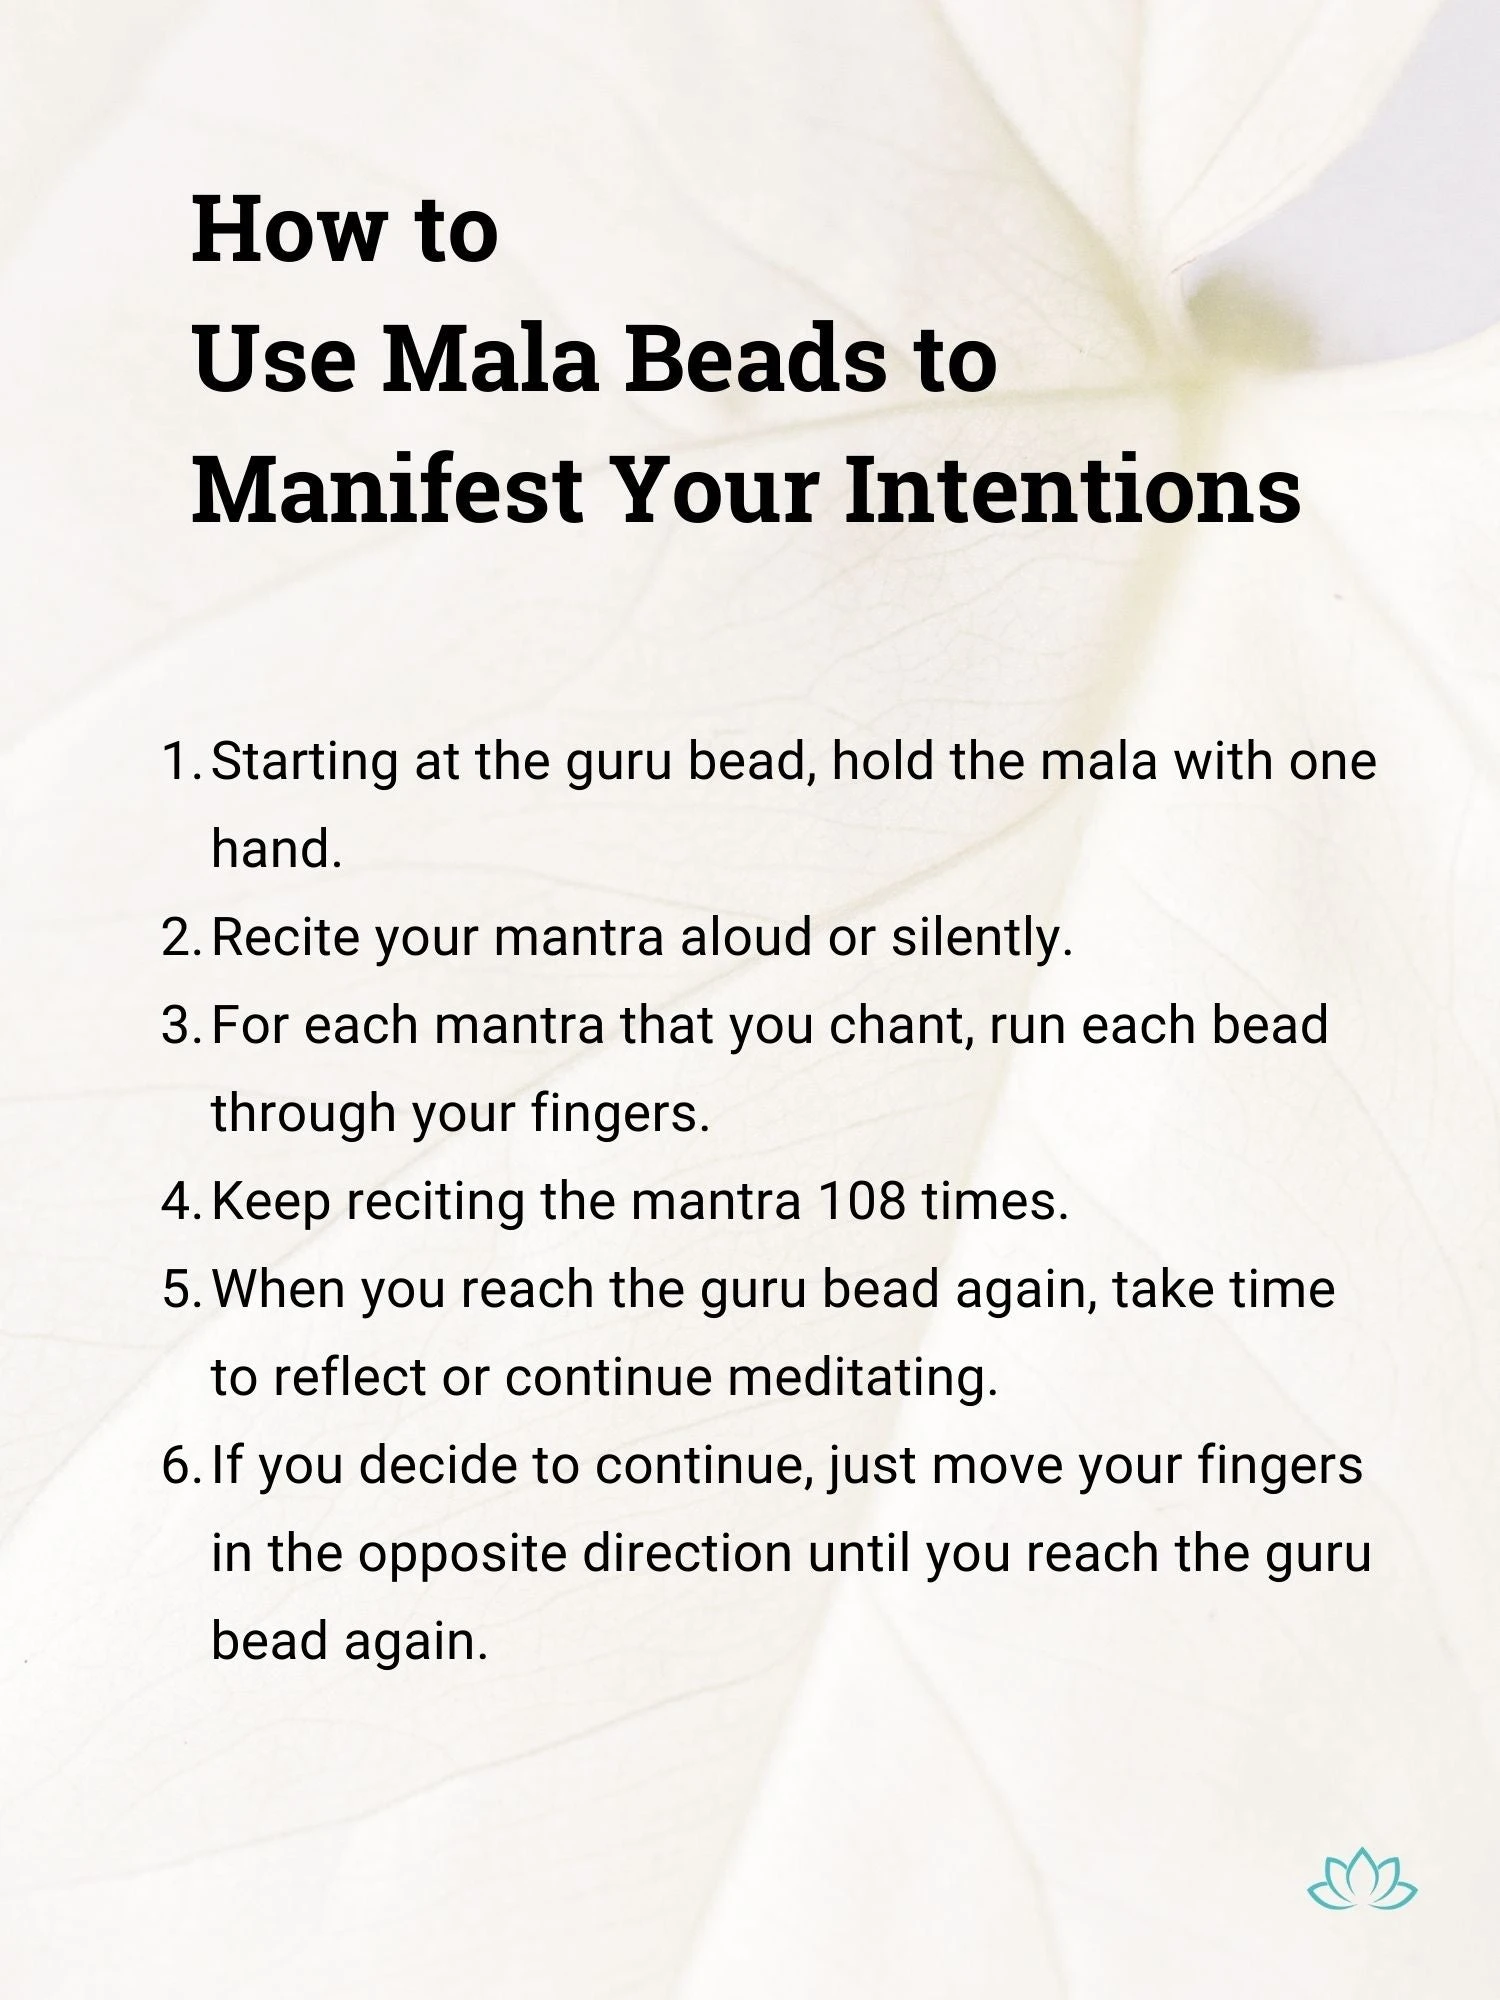 How to set intention with Mala beads